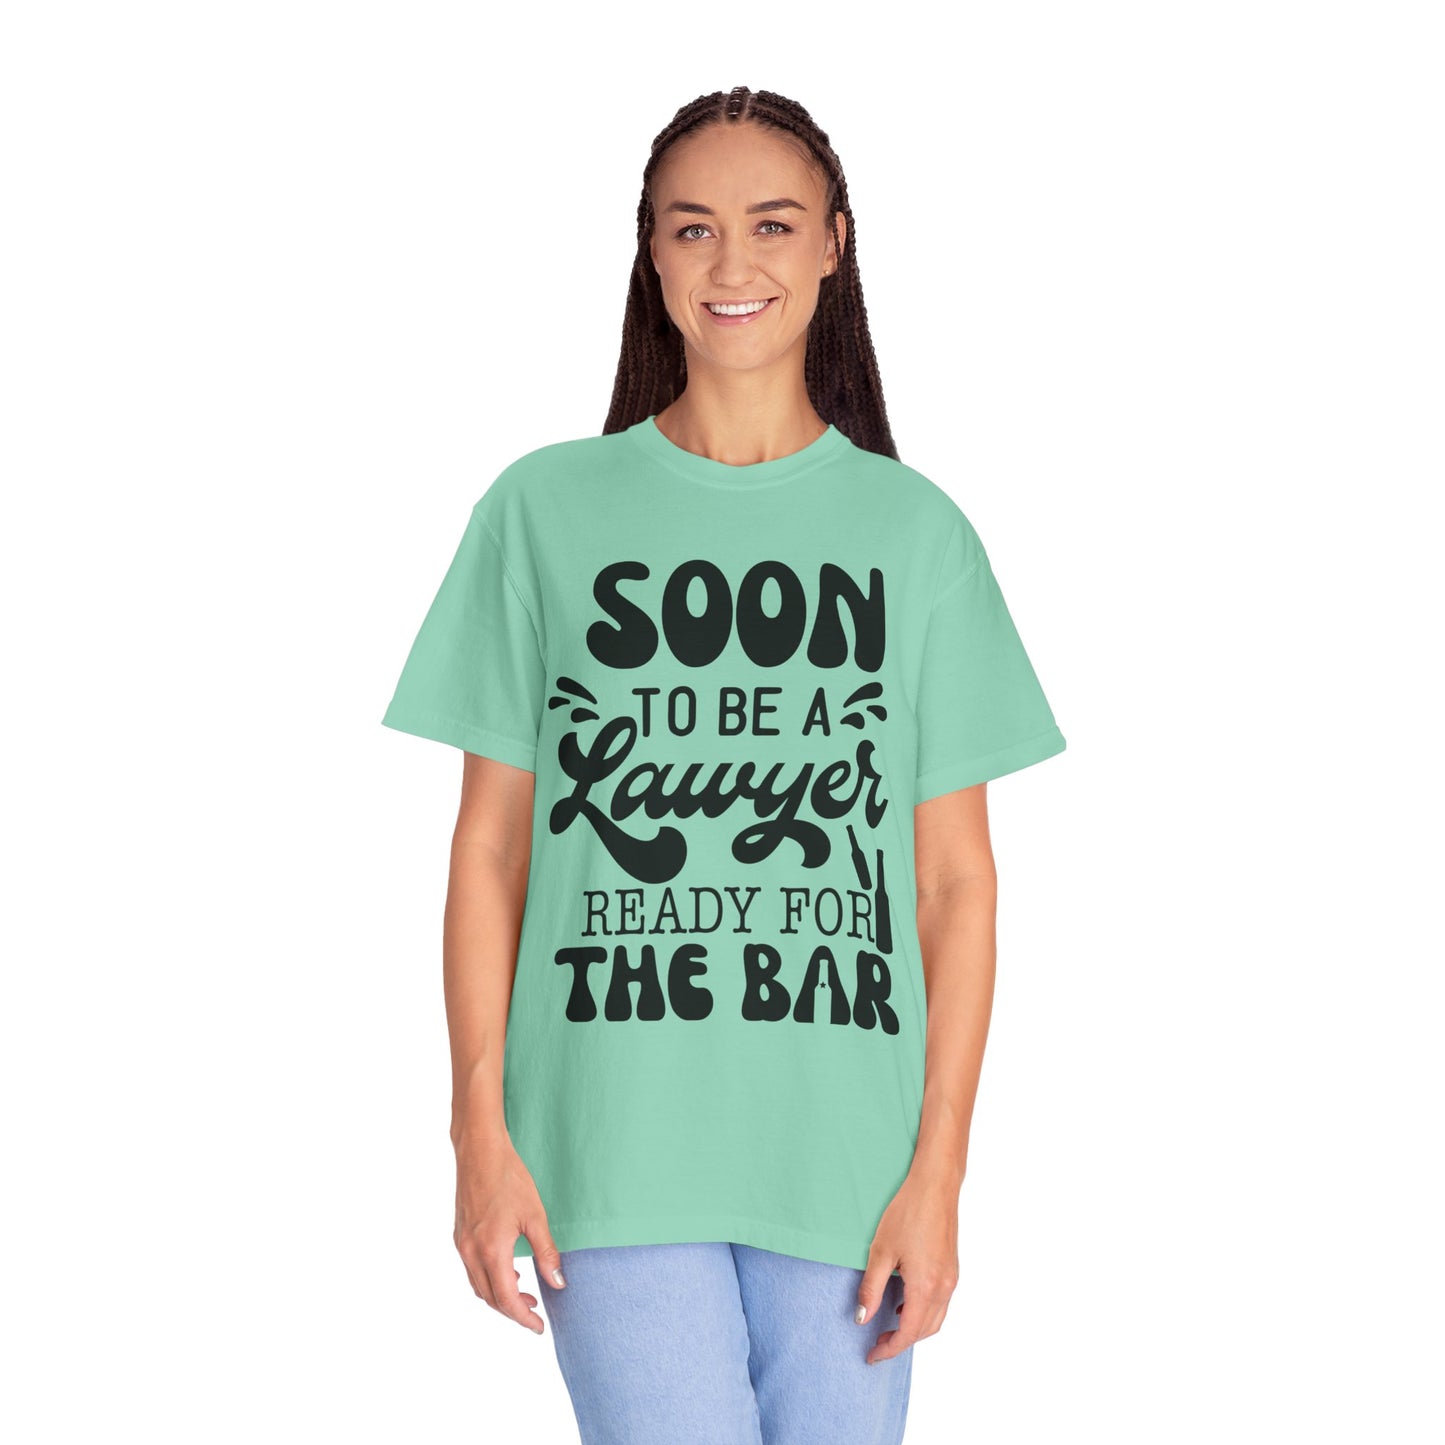 Soon to be a lawyer - Unisex Garment-Dyed T-shirt